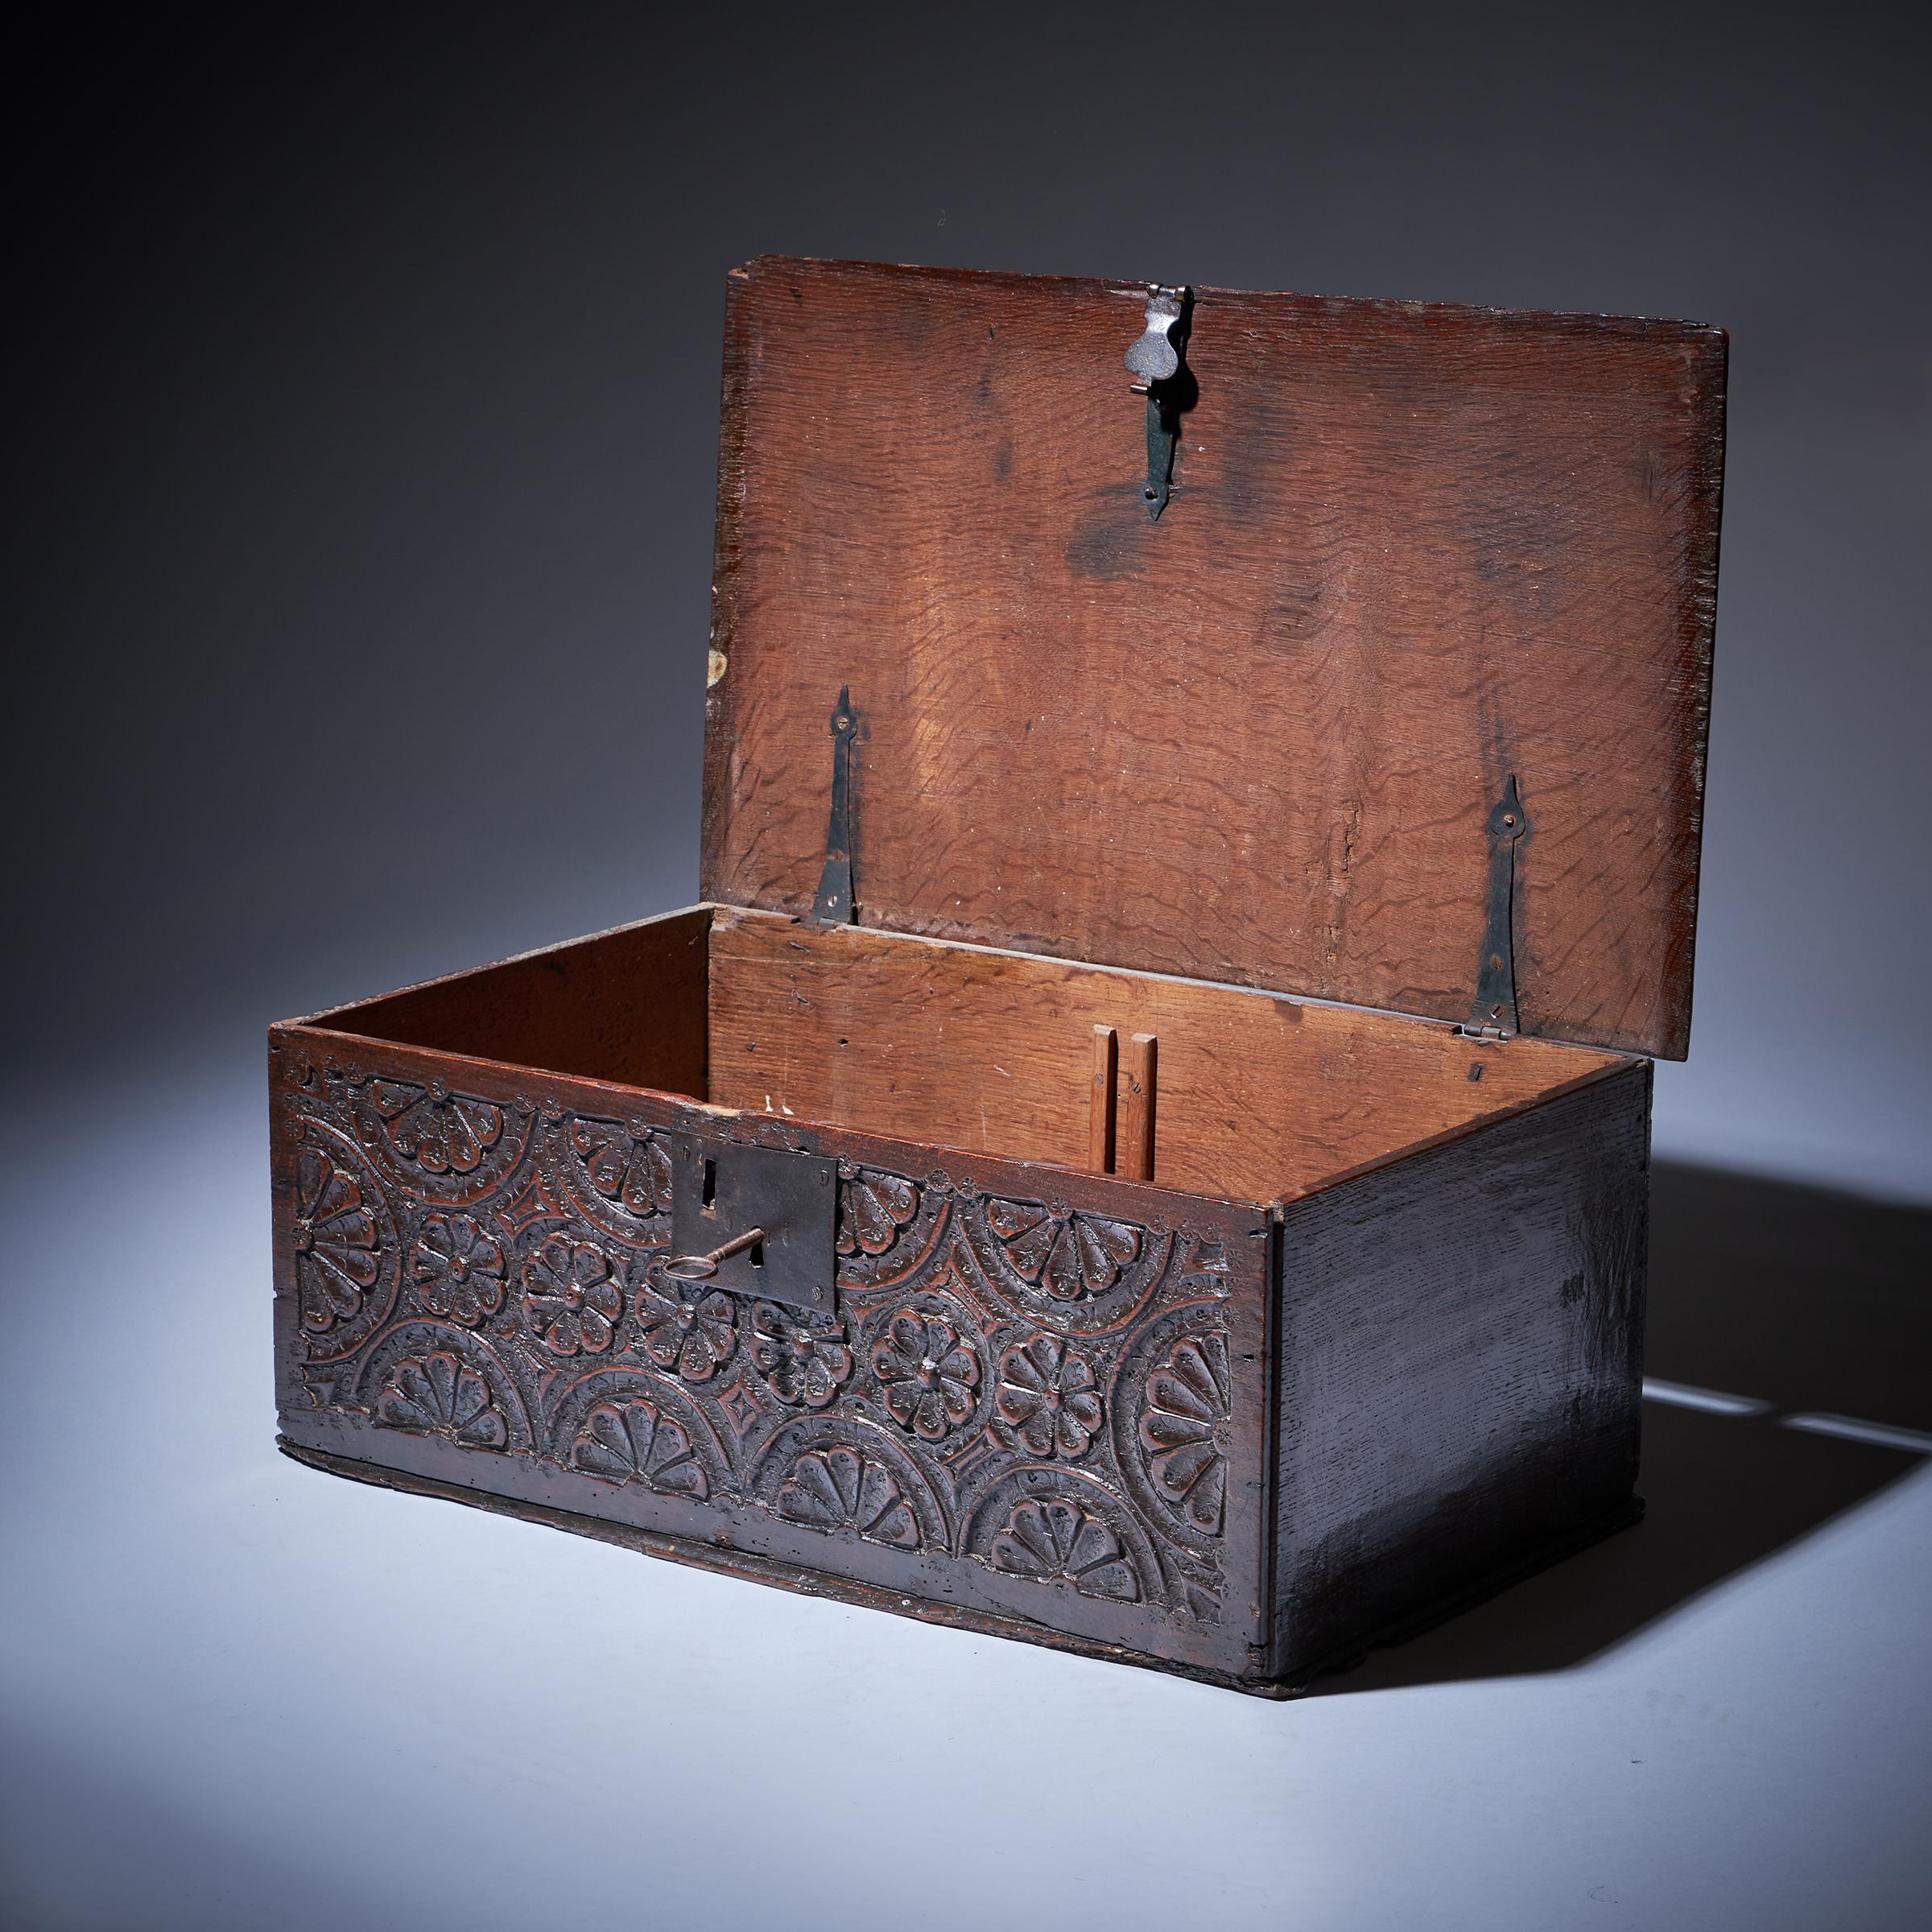 English 17th Century Charles I Carved Oak Box with Original Iron Clasp and Staple Lock For Sale